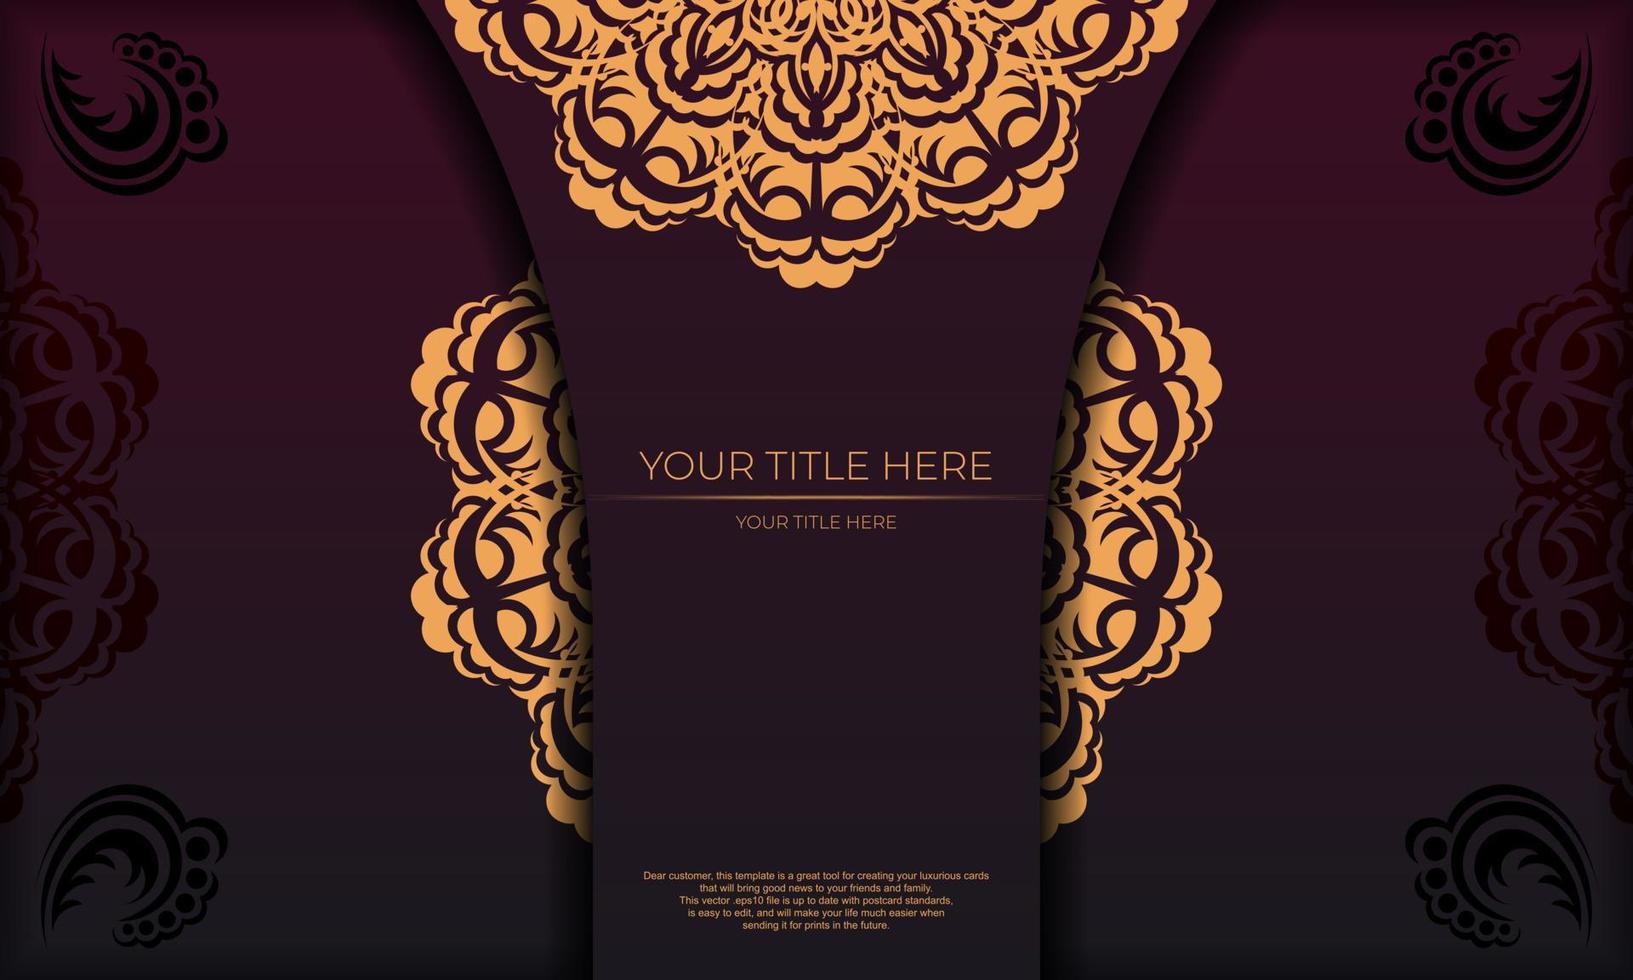 Burgundy banner template with vintage ornaments and place for your text. Print-ready invitation design with mandala ornament. vector